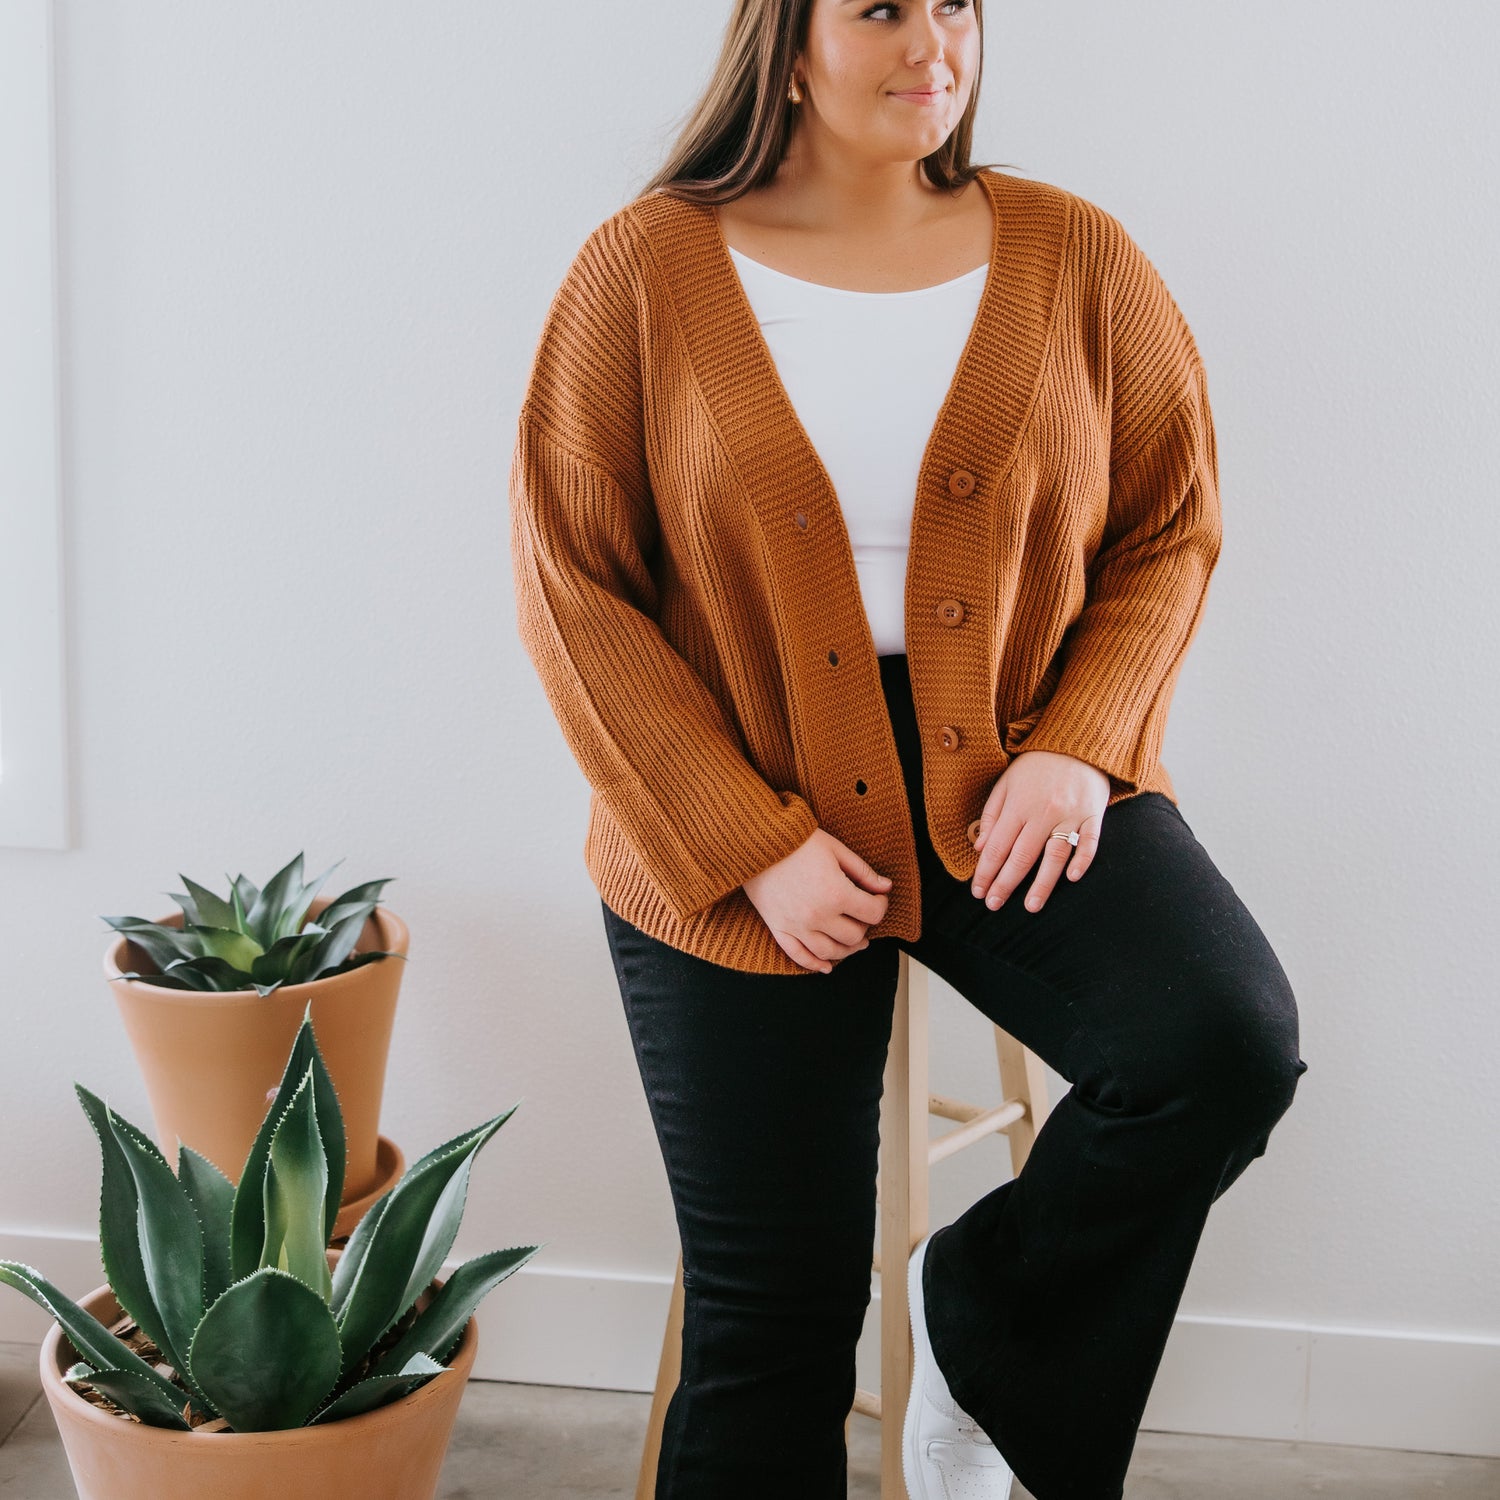 The Belles Cardigan by Lily & Lottie